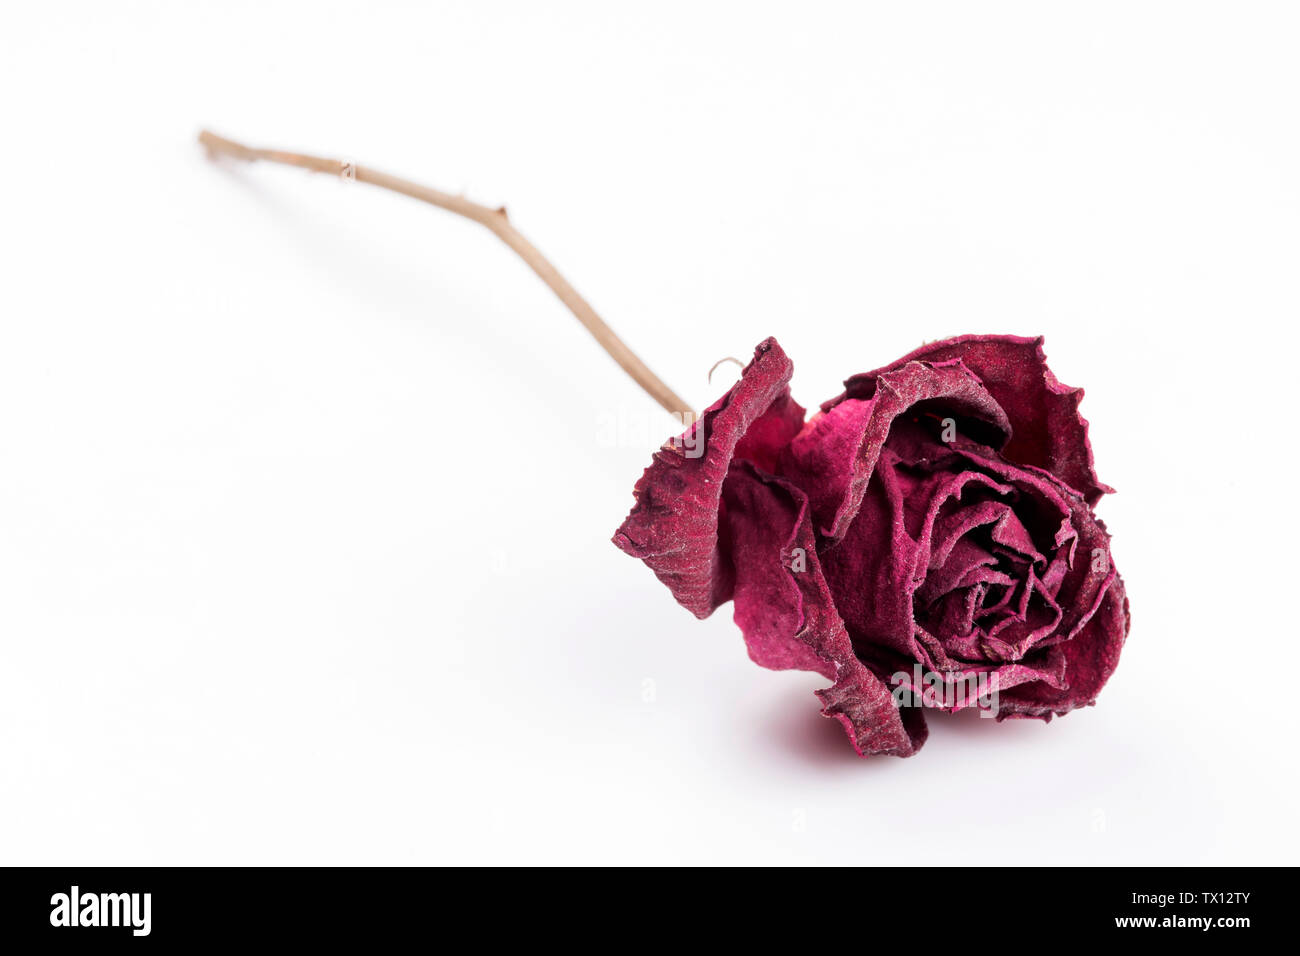 Wilting rose Cut Out Stock Images & Pictures - Alamy